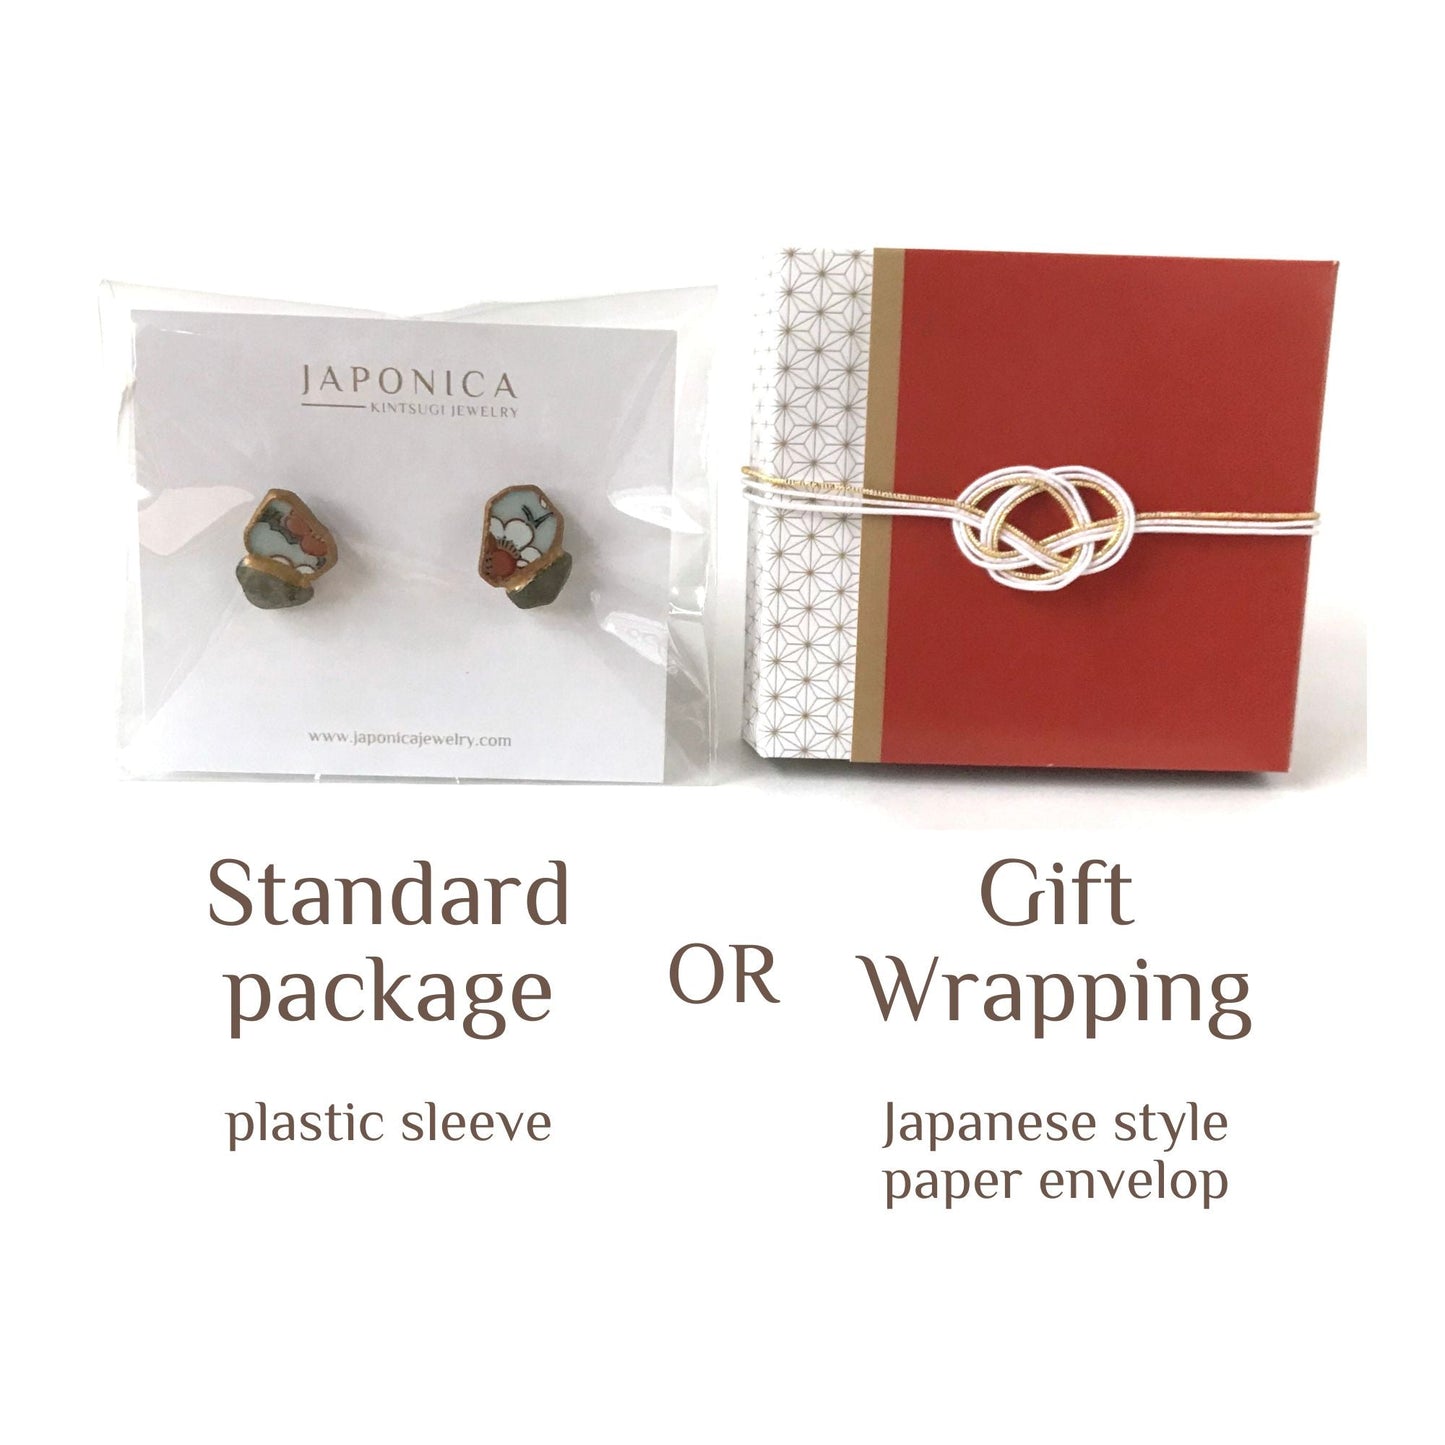 Kintsugi jewelry gift wrapping vs standard package